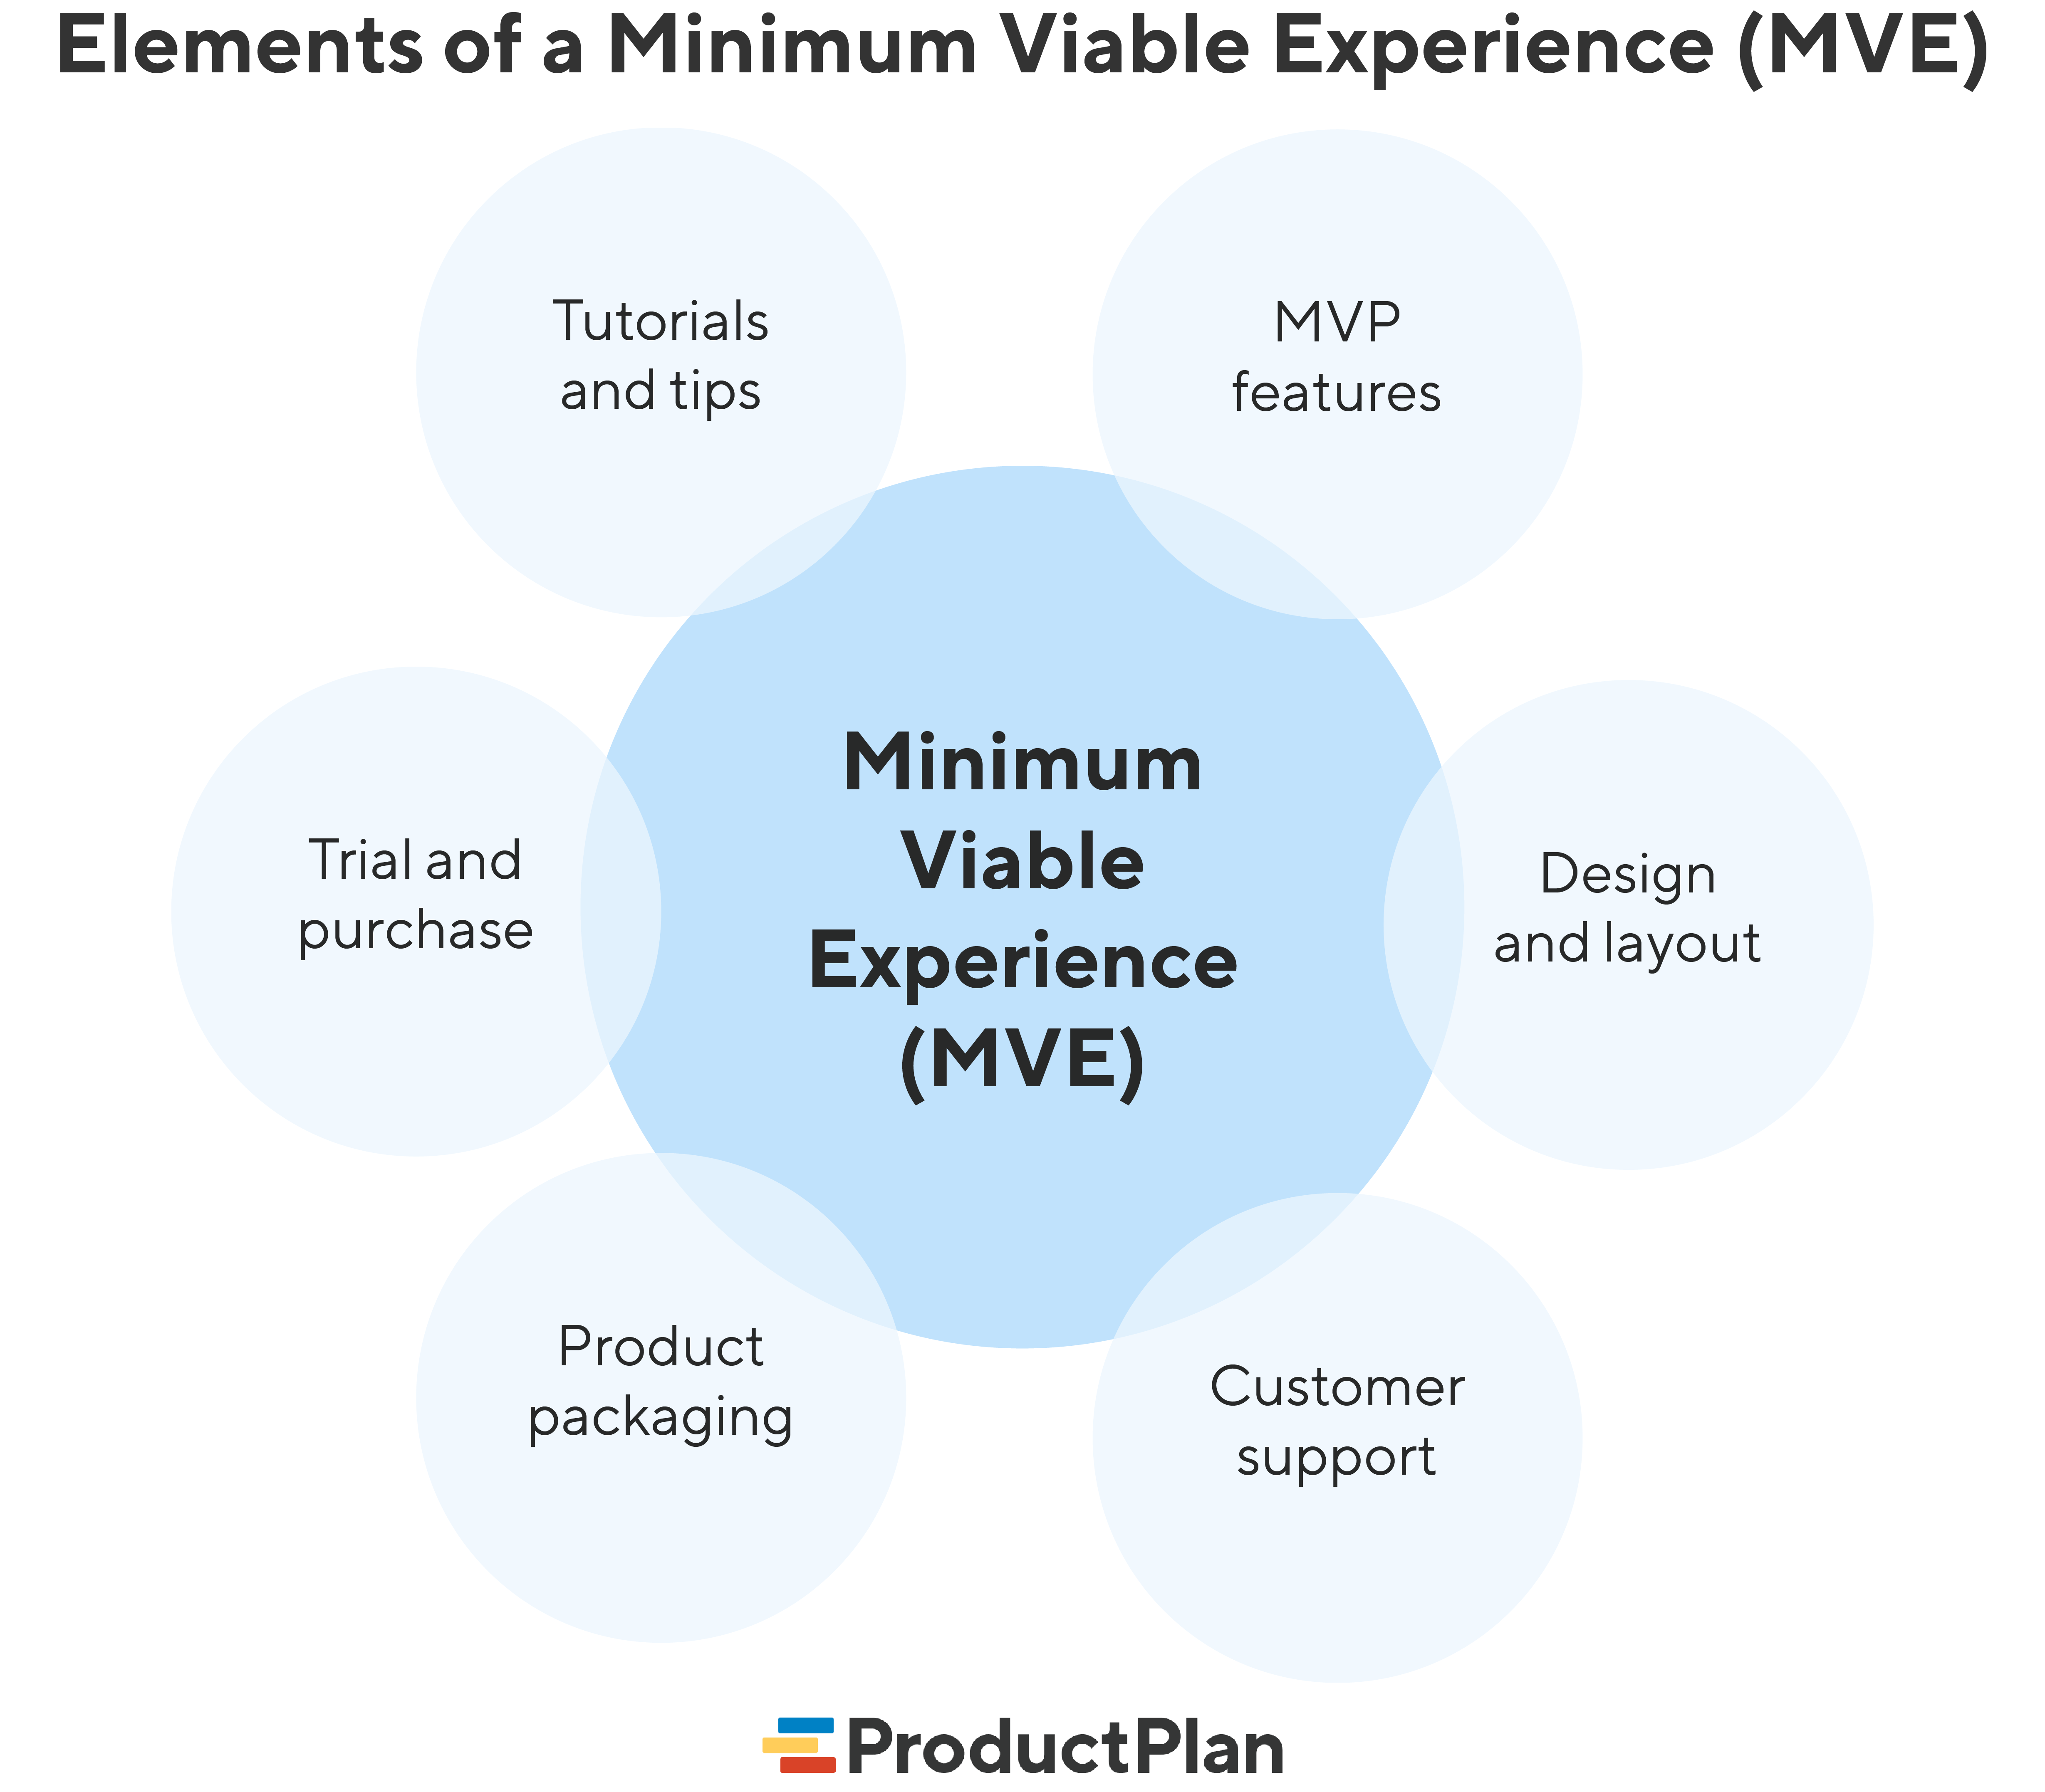 What is Minimum Viable Experience (MVE)?